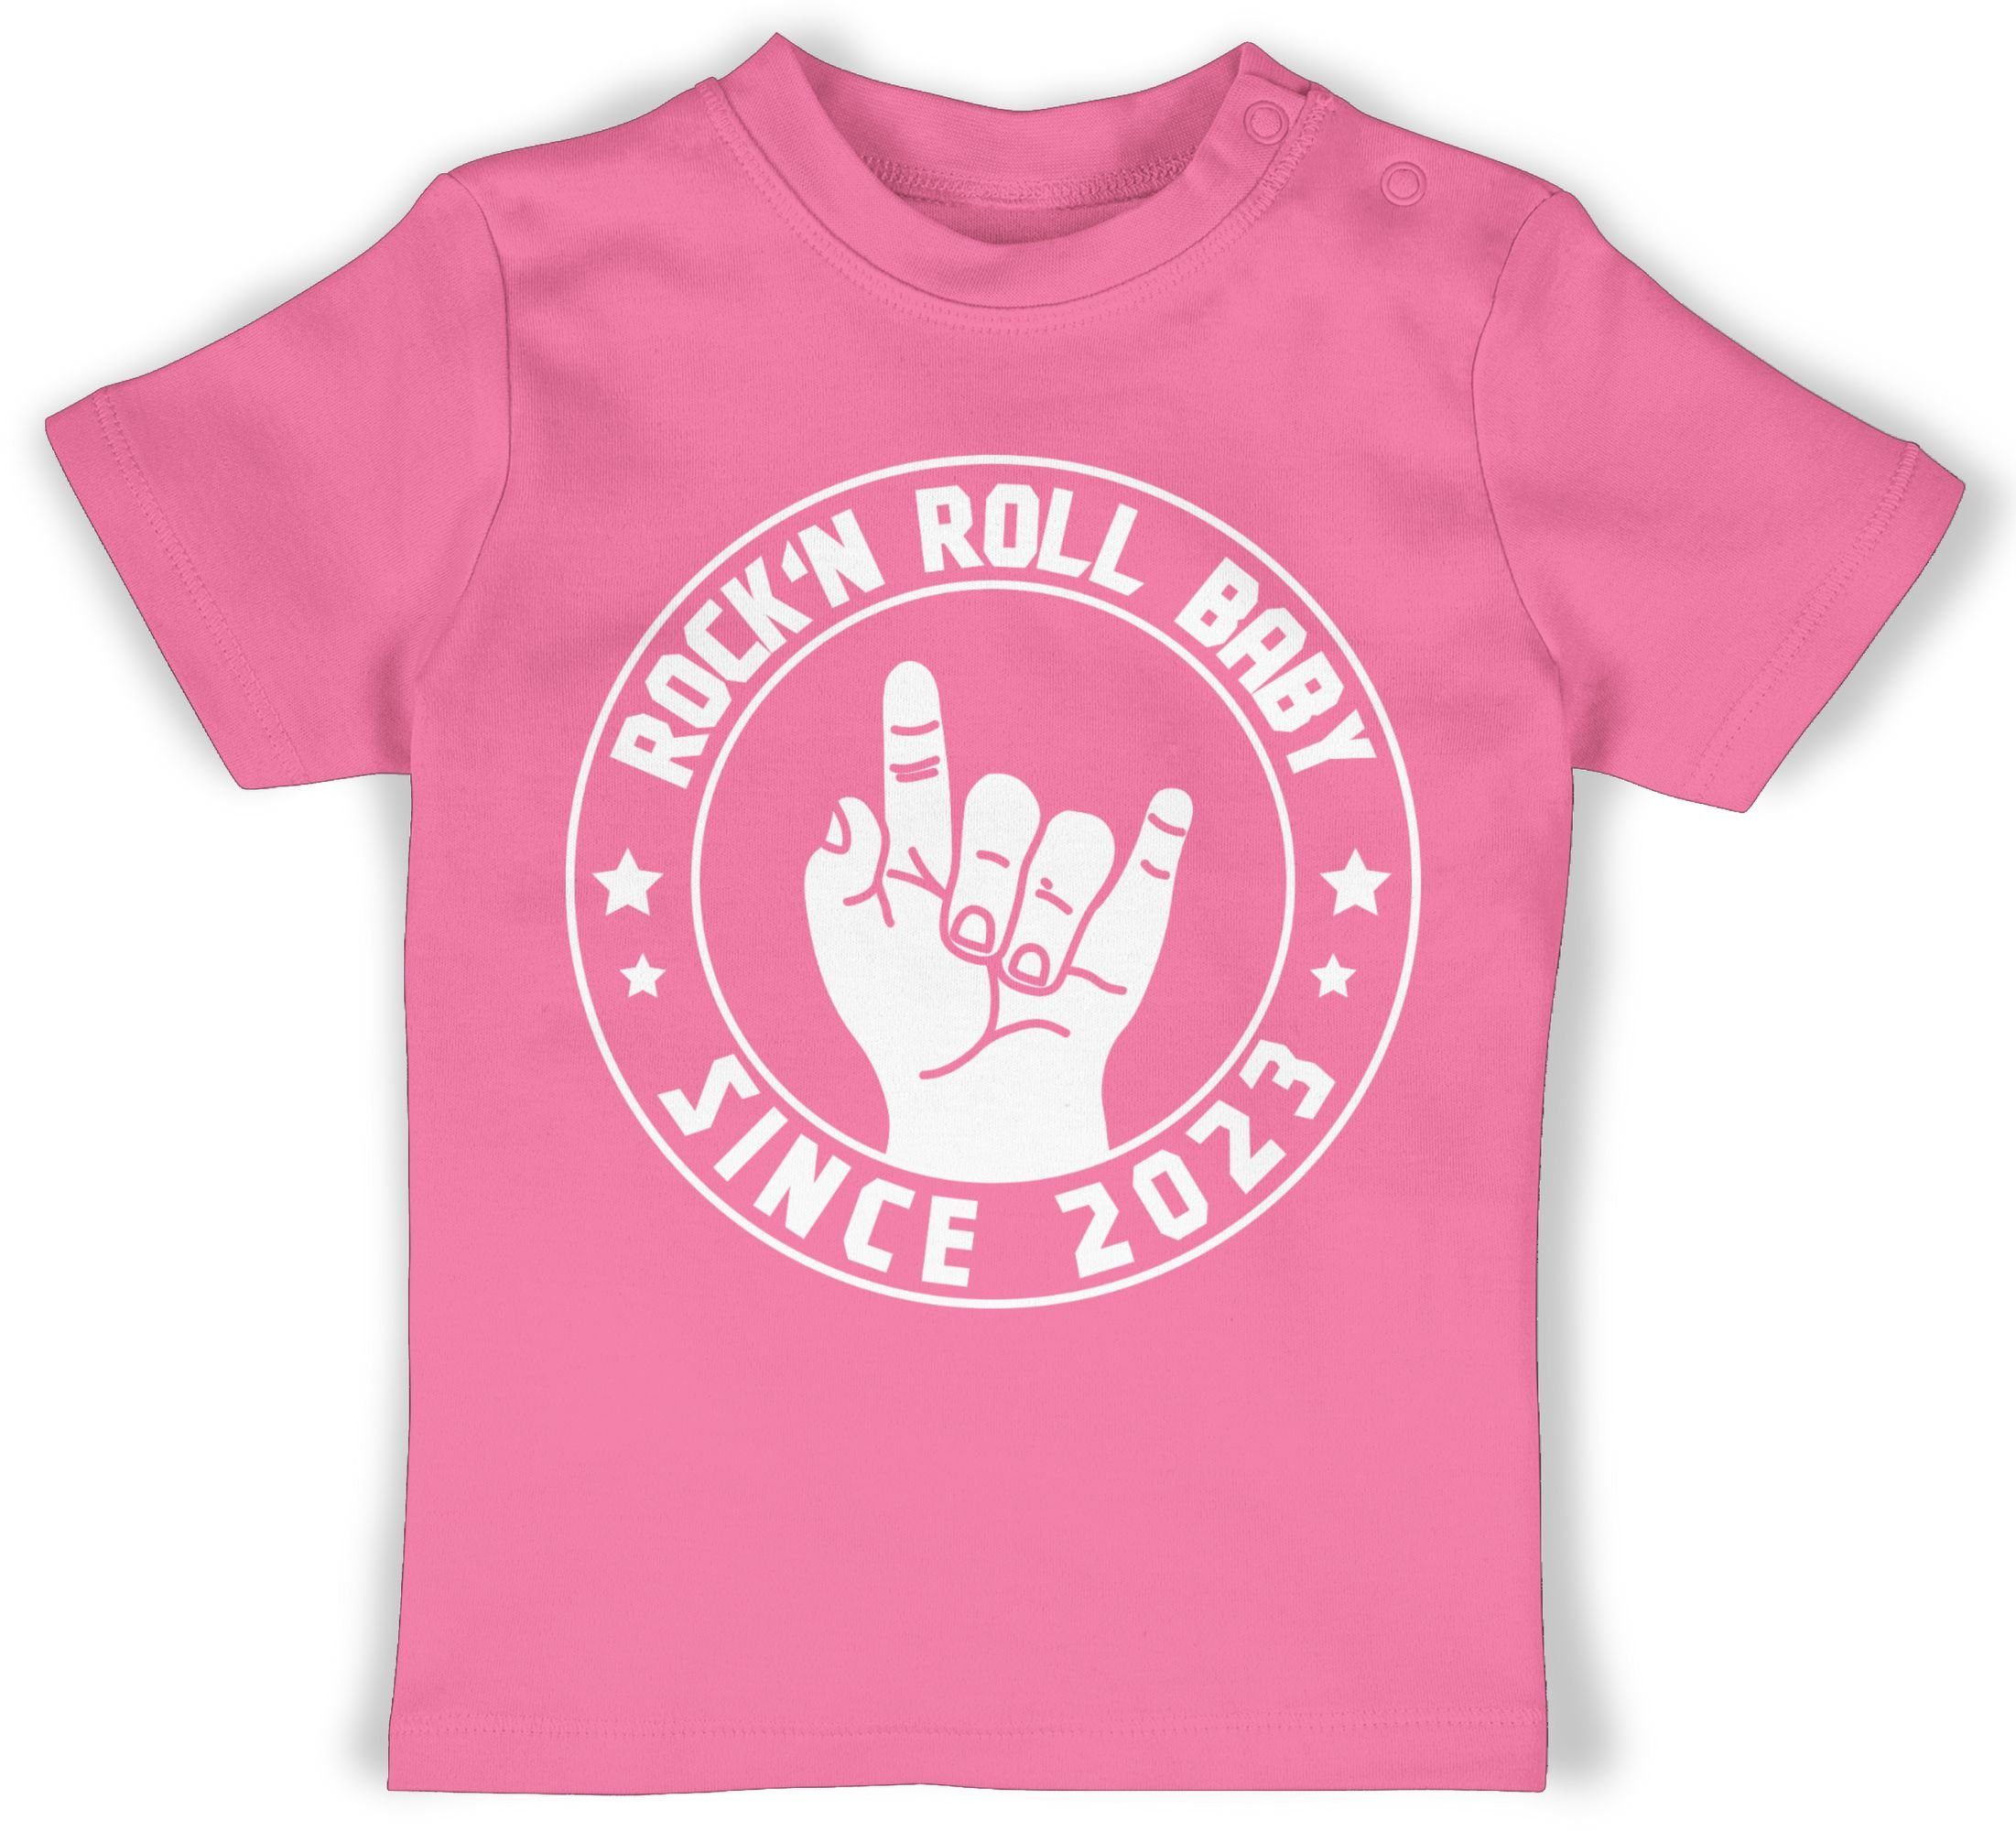 Shirtracer T-Shirt Rock'n Roll Baby since 2023 Sprüche Baby 2 Pink